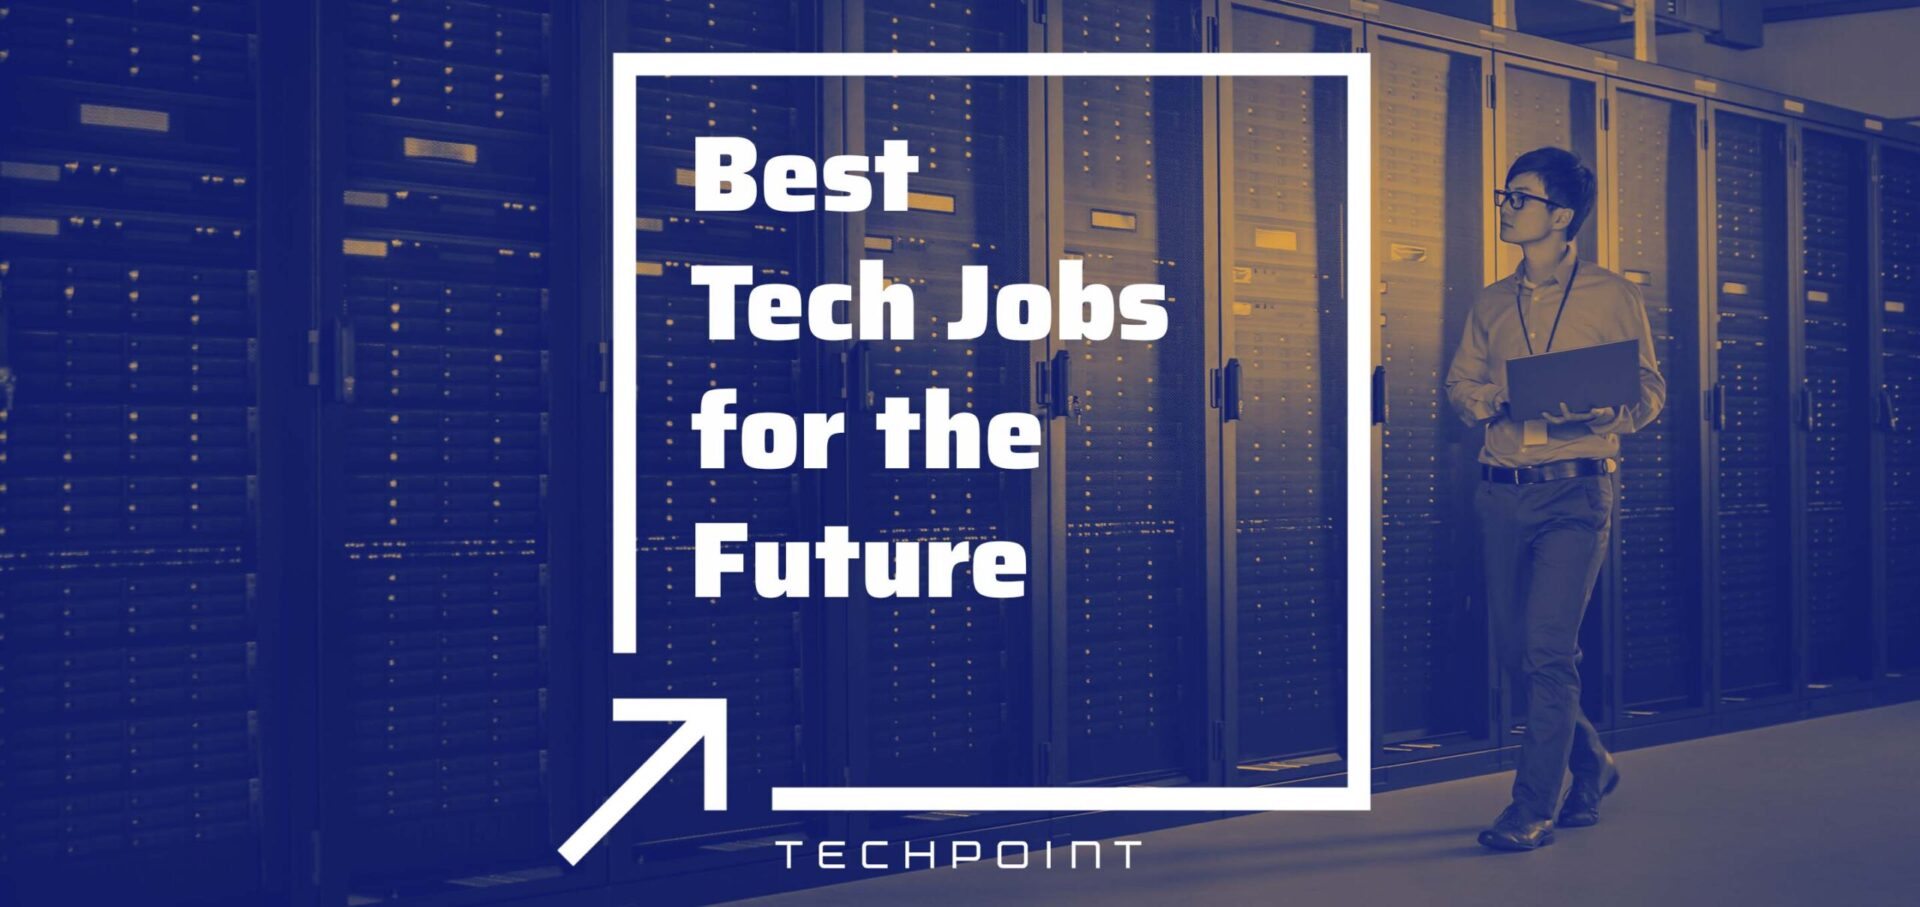 Best-Tech-Jobs-for-the-Future-1-scaled.jpg